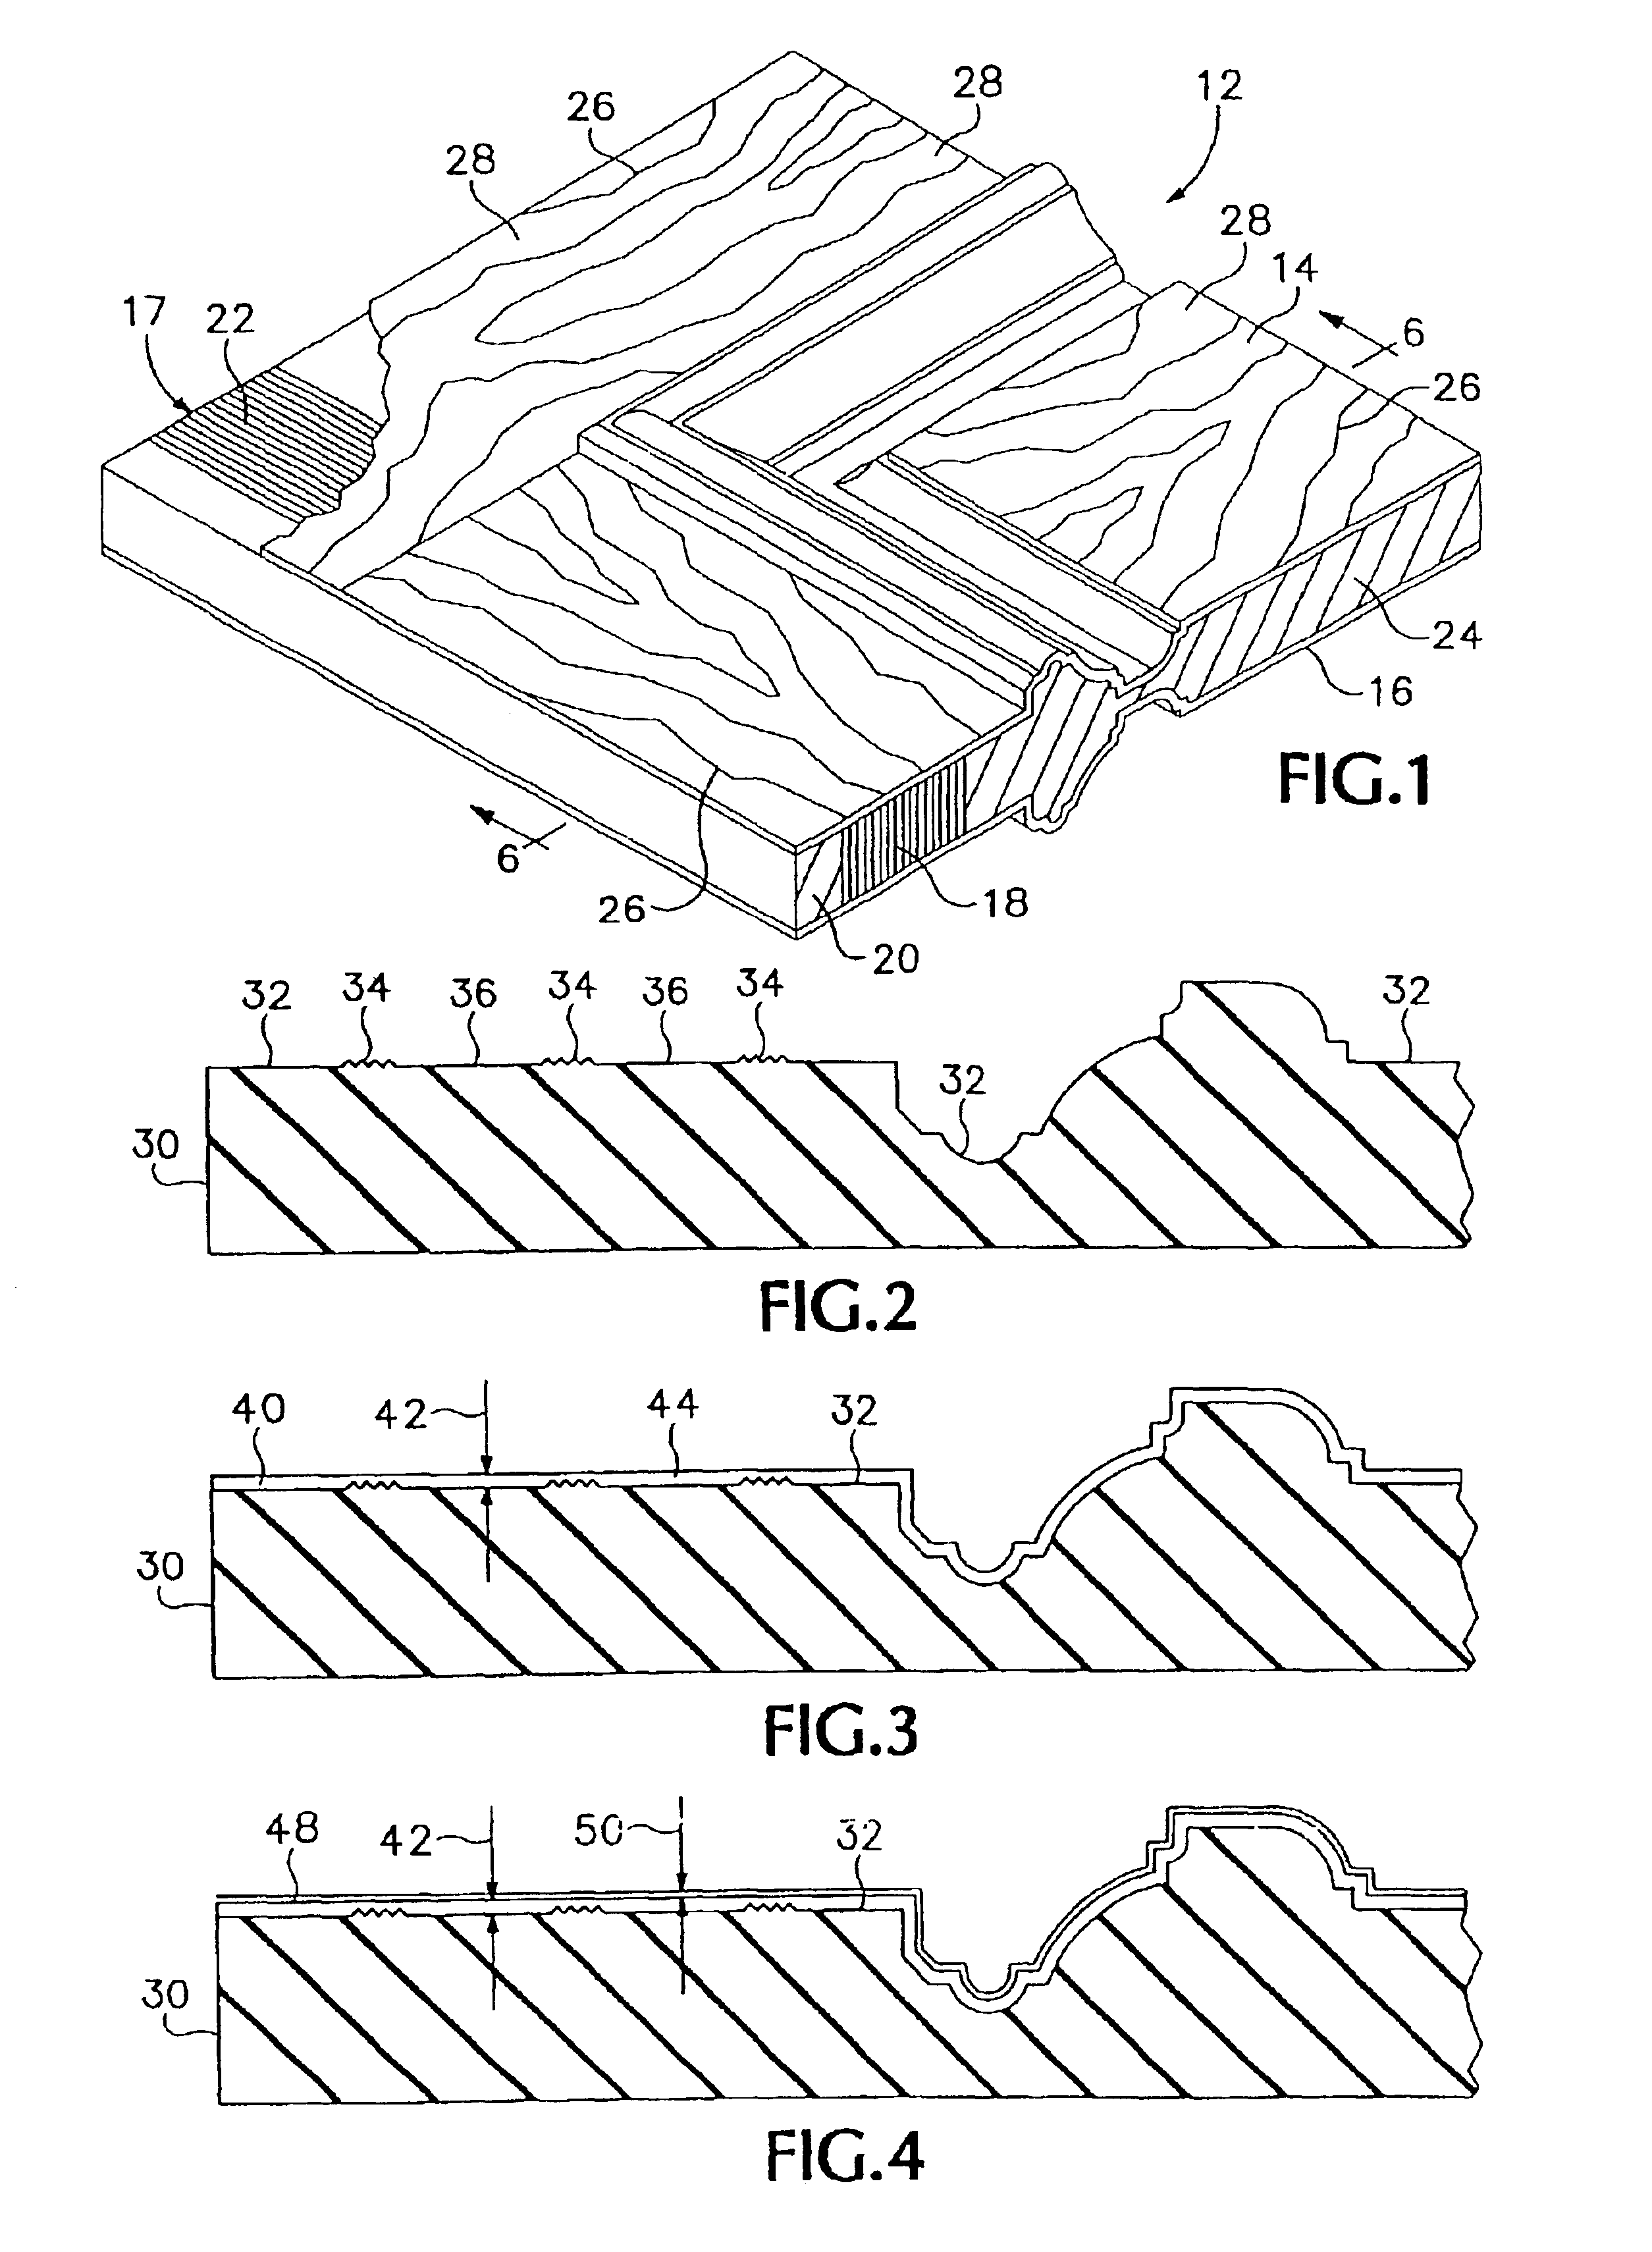 Articles of composite structure having appearance of wood